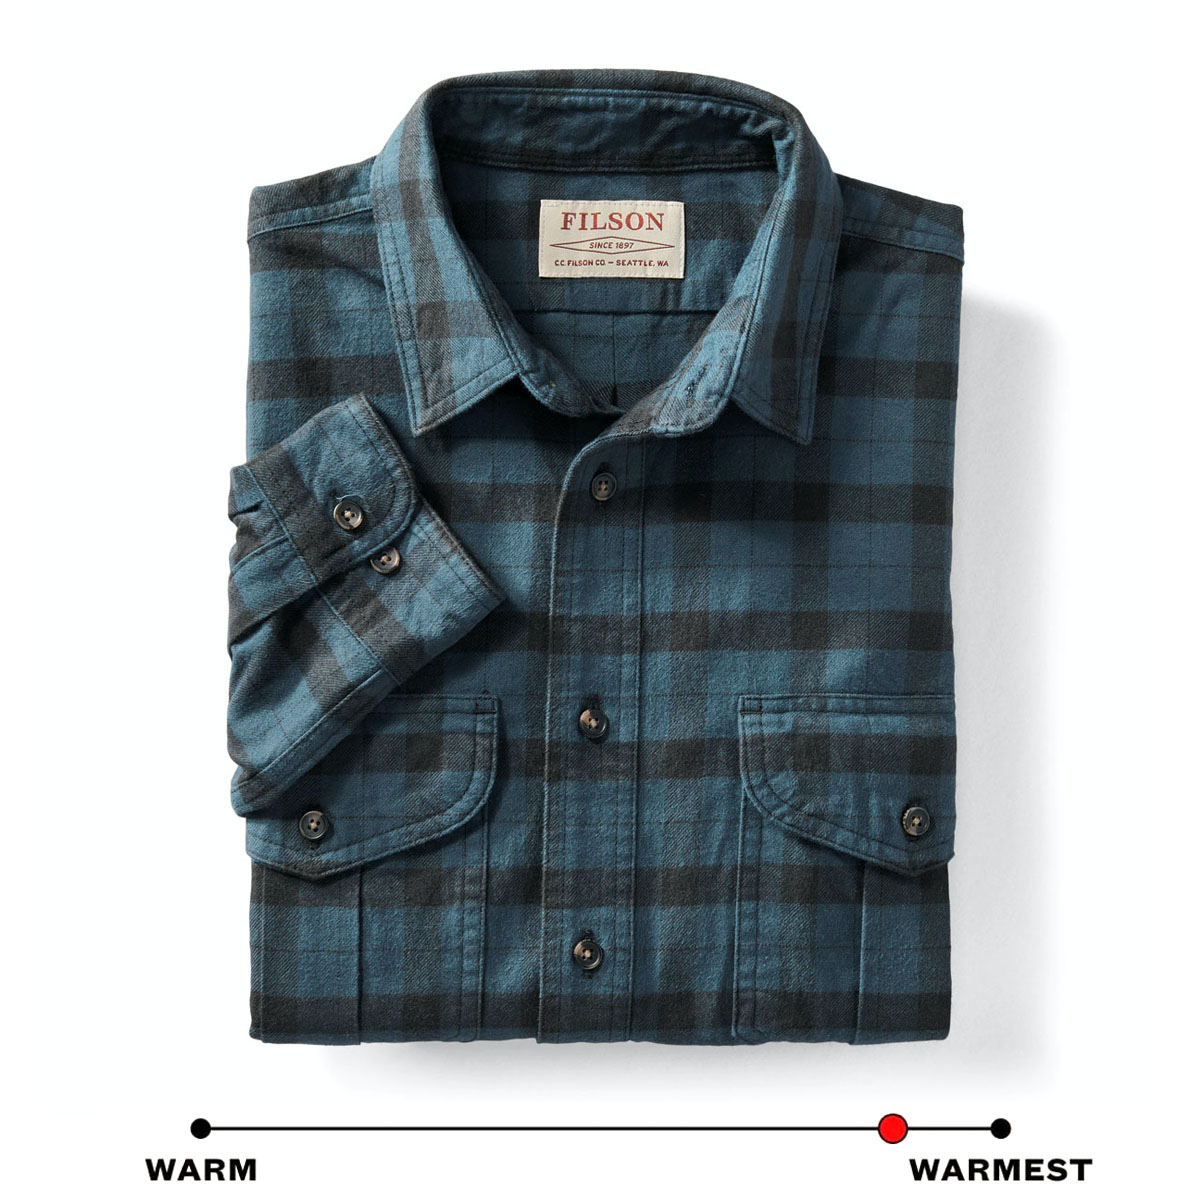 Filson Alaskan Guide Shirt Midnight Black, this iconic, breathable flannel shirt has a pleated back for freedom of movement